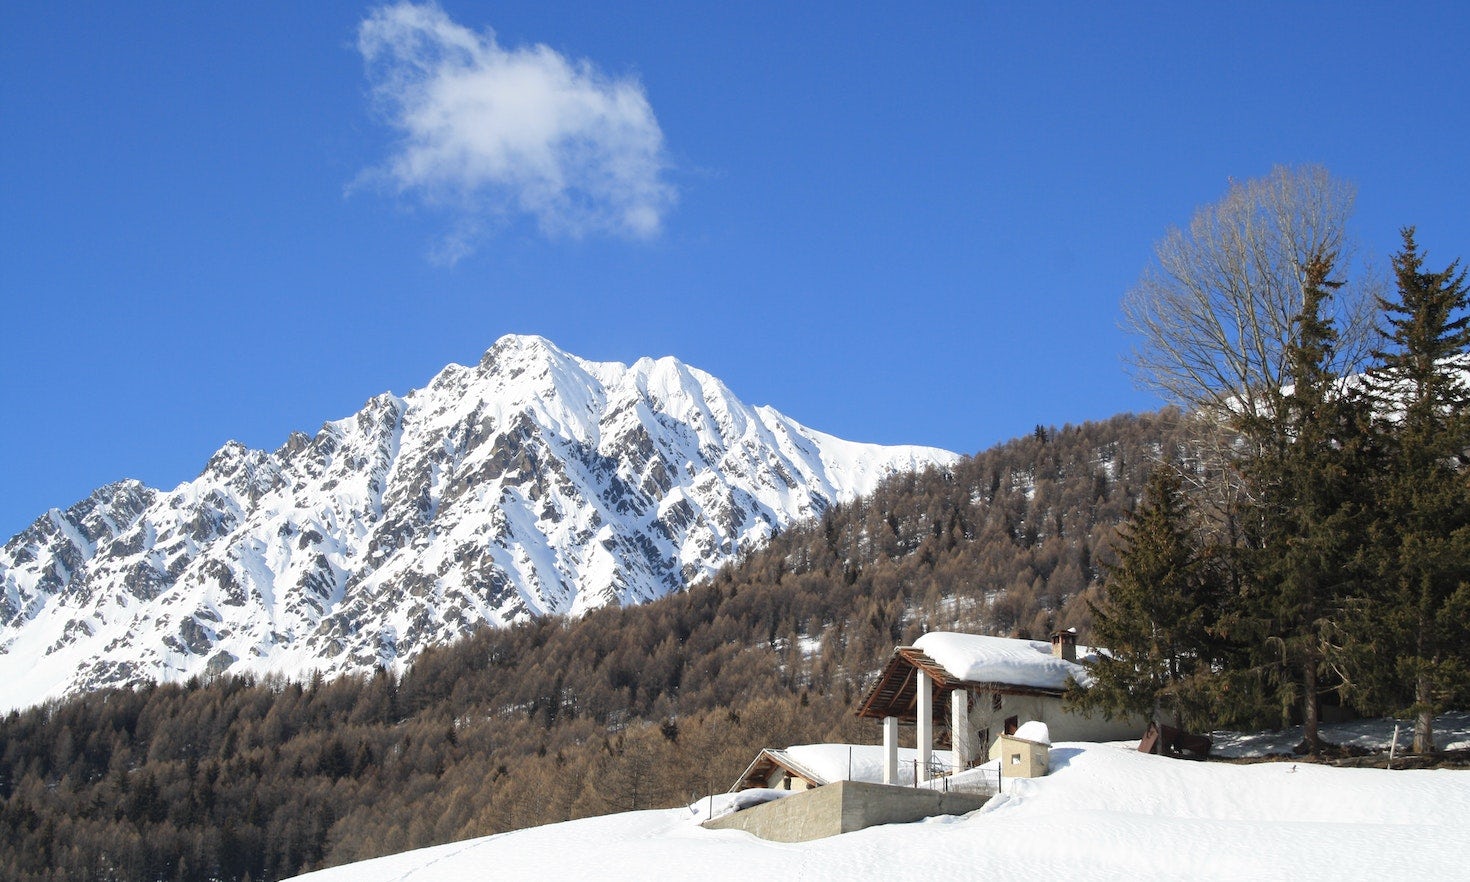 Languages in Aosta Valley – An initial less conventional picture from the inside